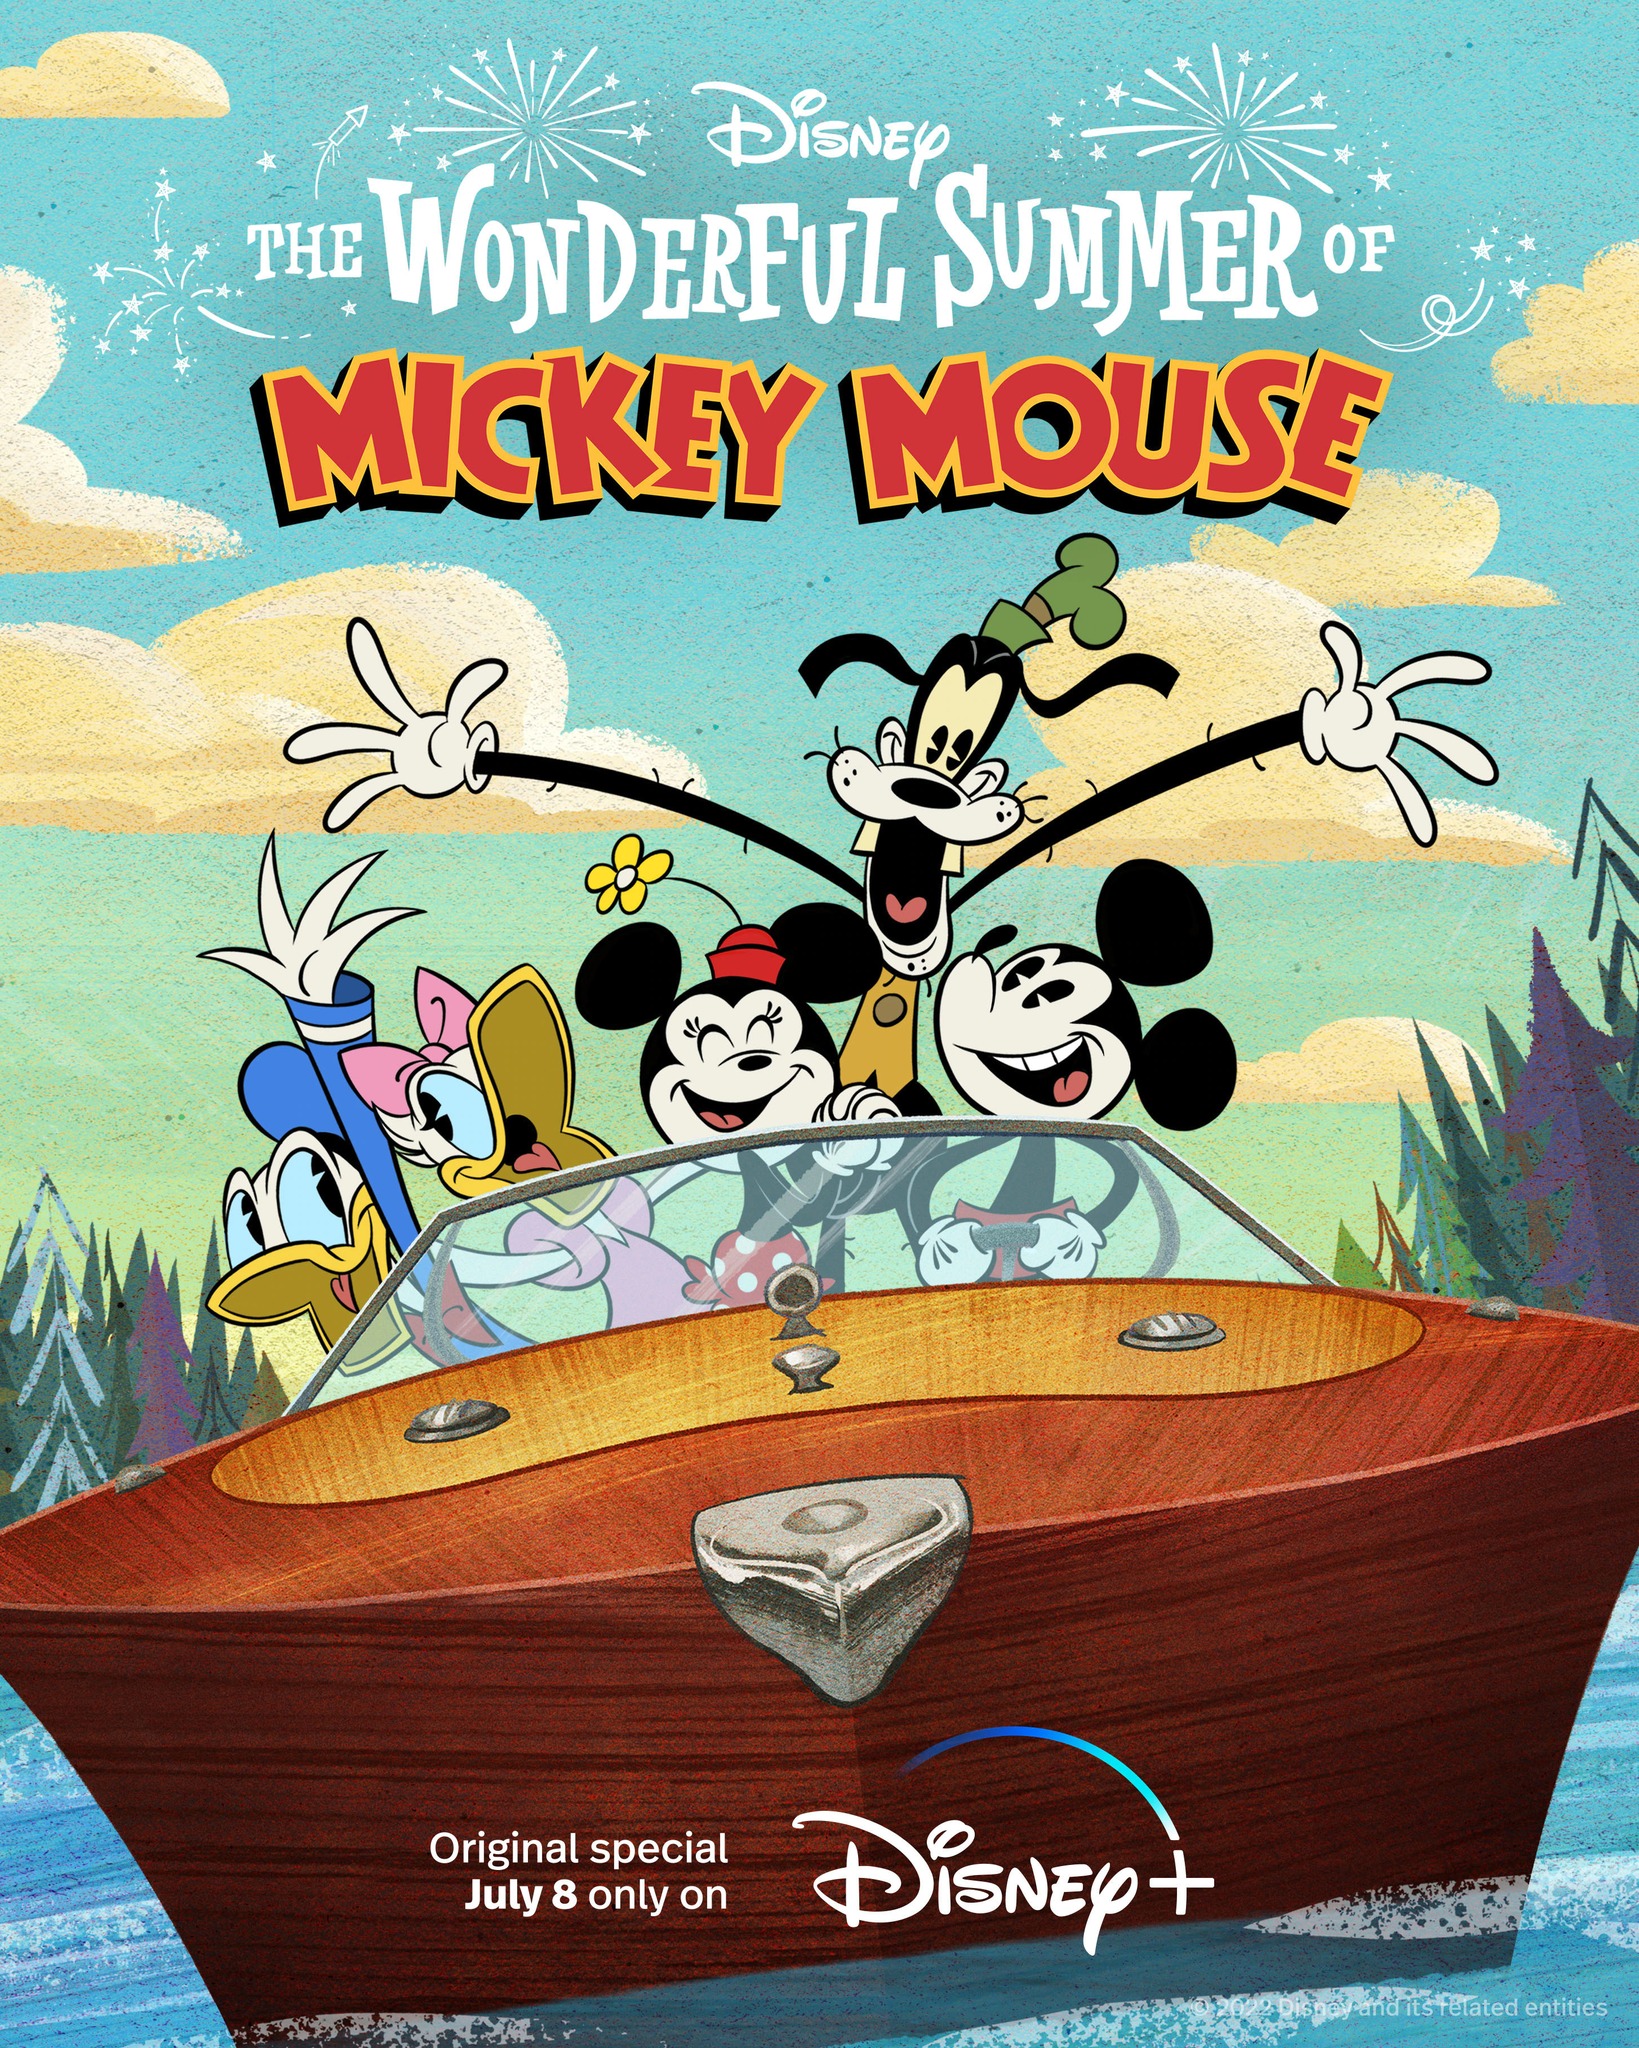 https://static.wikia.nocookie.net/disney/images/8/84/Wonderful_Summer_of_Mickey_Mouse_poster.jpg/revision/latest?cb=20220614005105